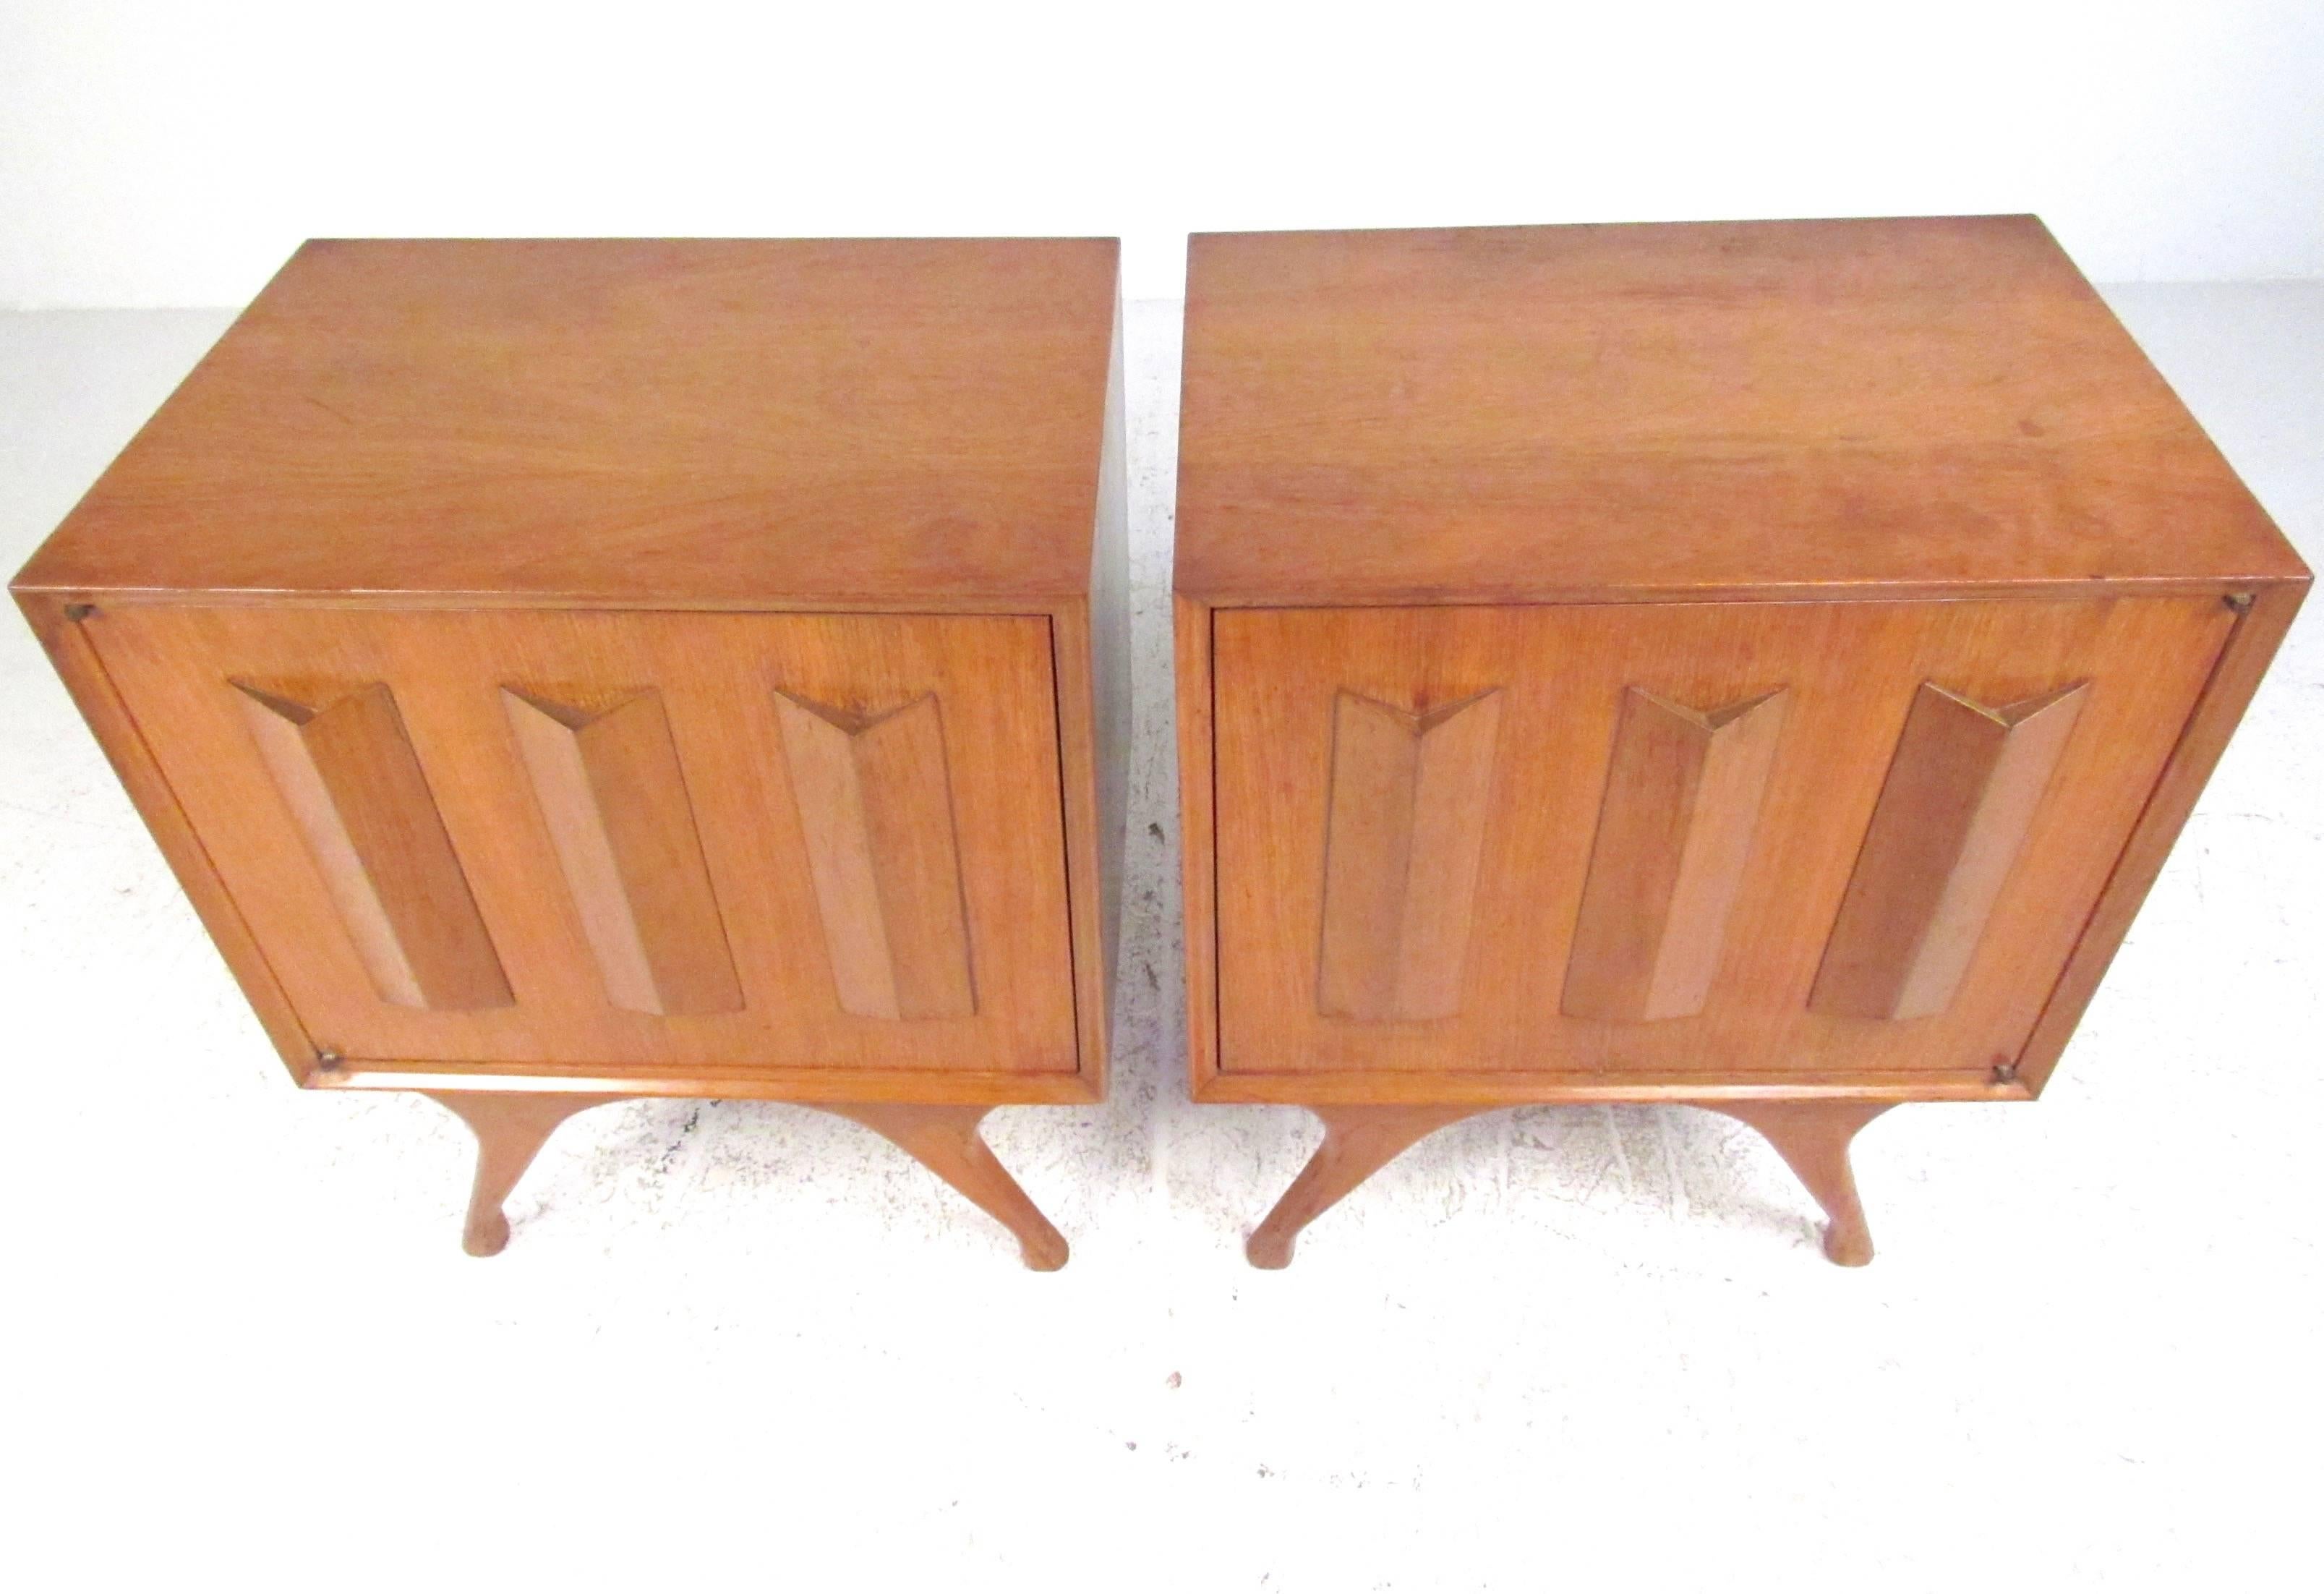 Carved Vintage American Walnut Nightstands by Specialty Woodcraft For Sale